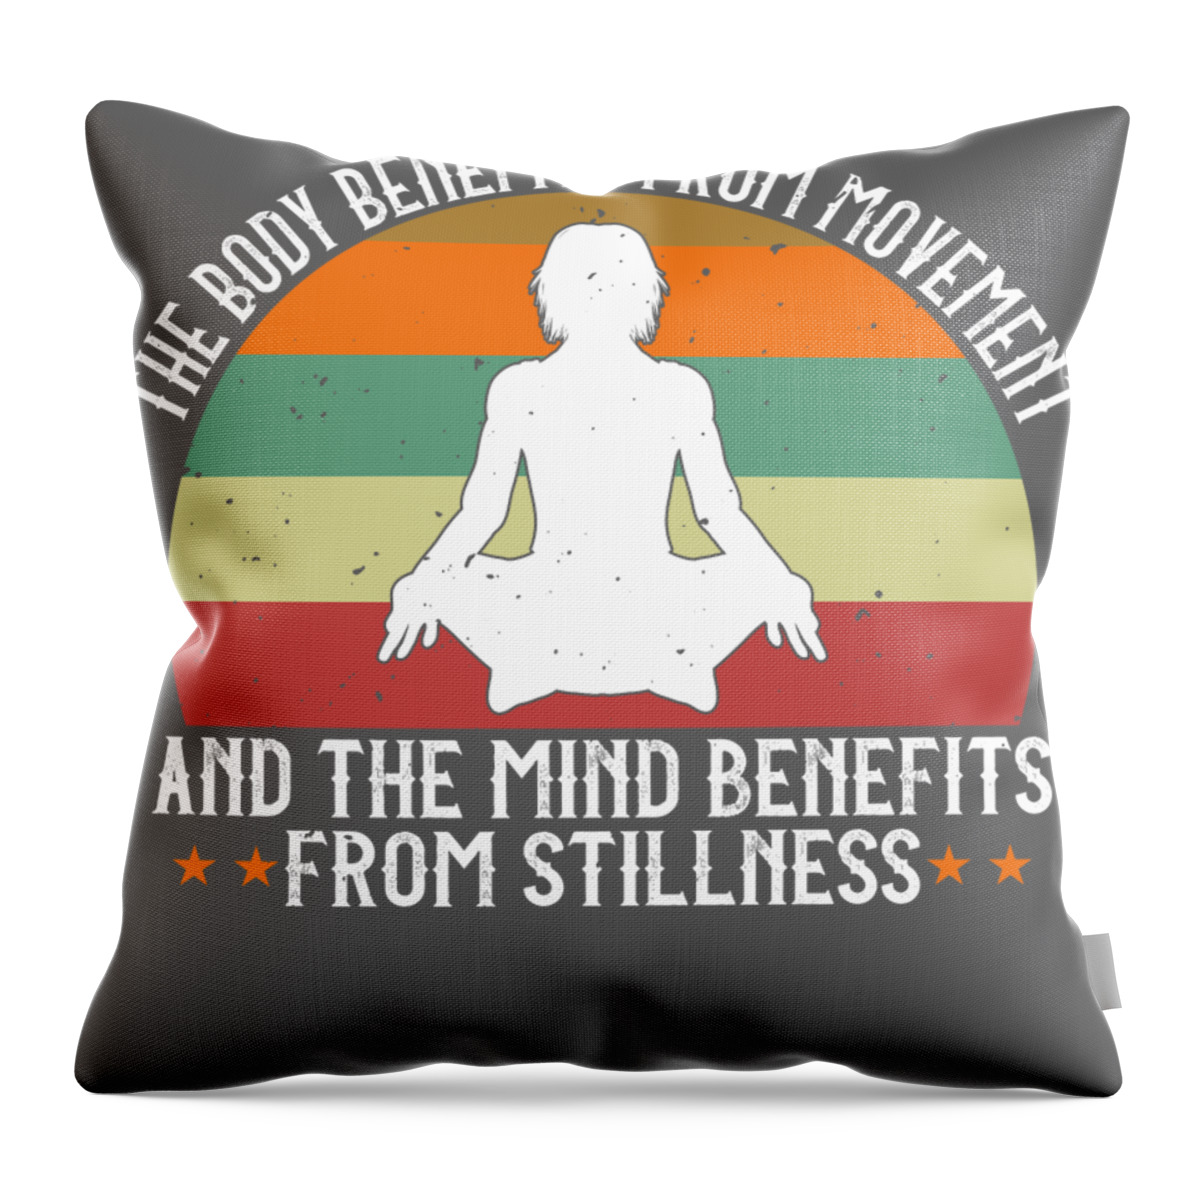 Yoga Throw Pillow featuring the digital art Yoga Gift The Body Benefits From Movement And The Mind Benefits From Stillness by Jeff Creation